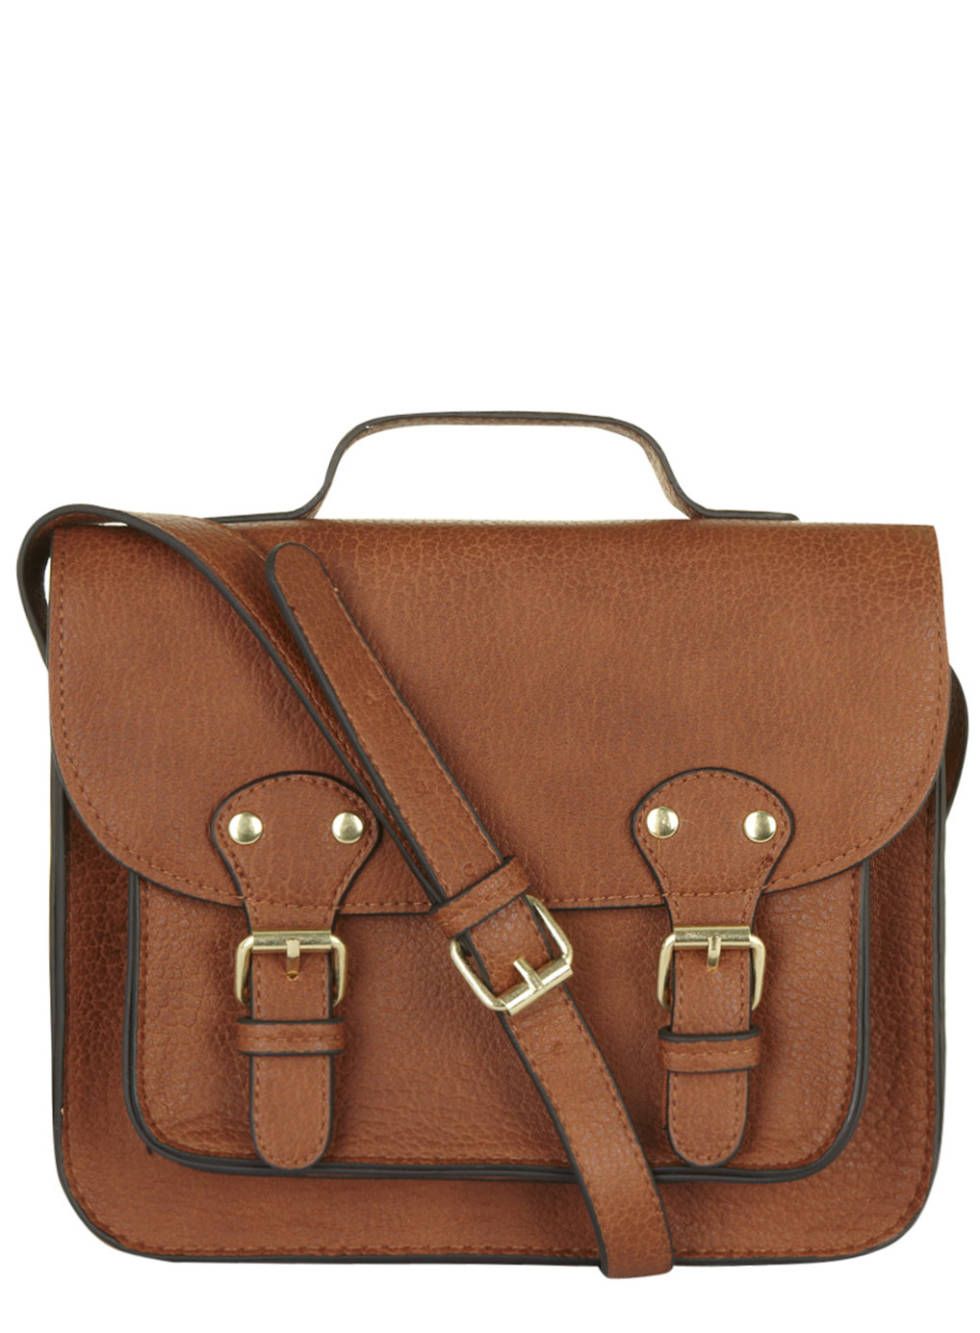 Product, Brown, Bag, Textile, Tan, Luggage and bags, Leather, Shoulder bag, Pocket, Strap, 